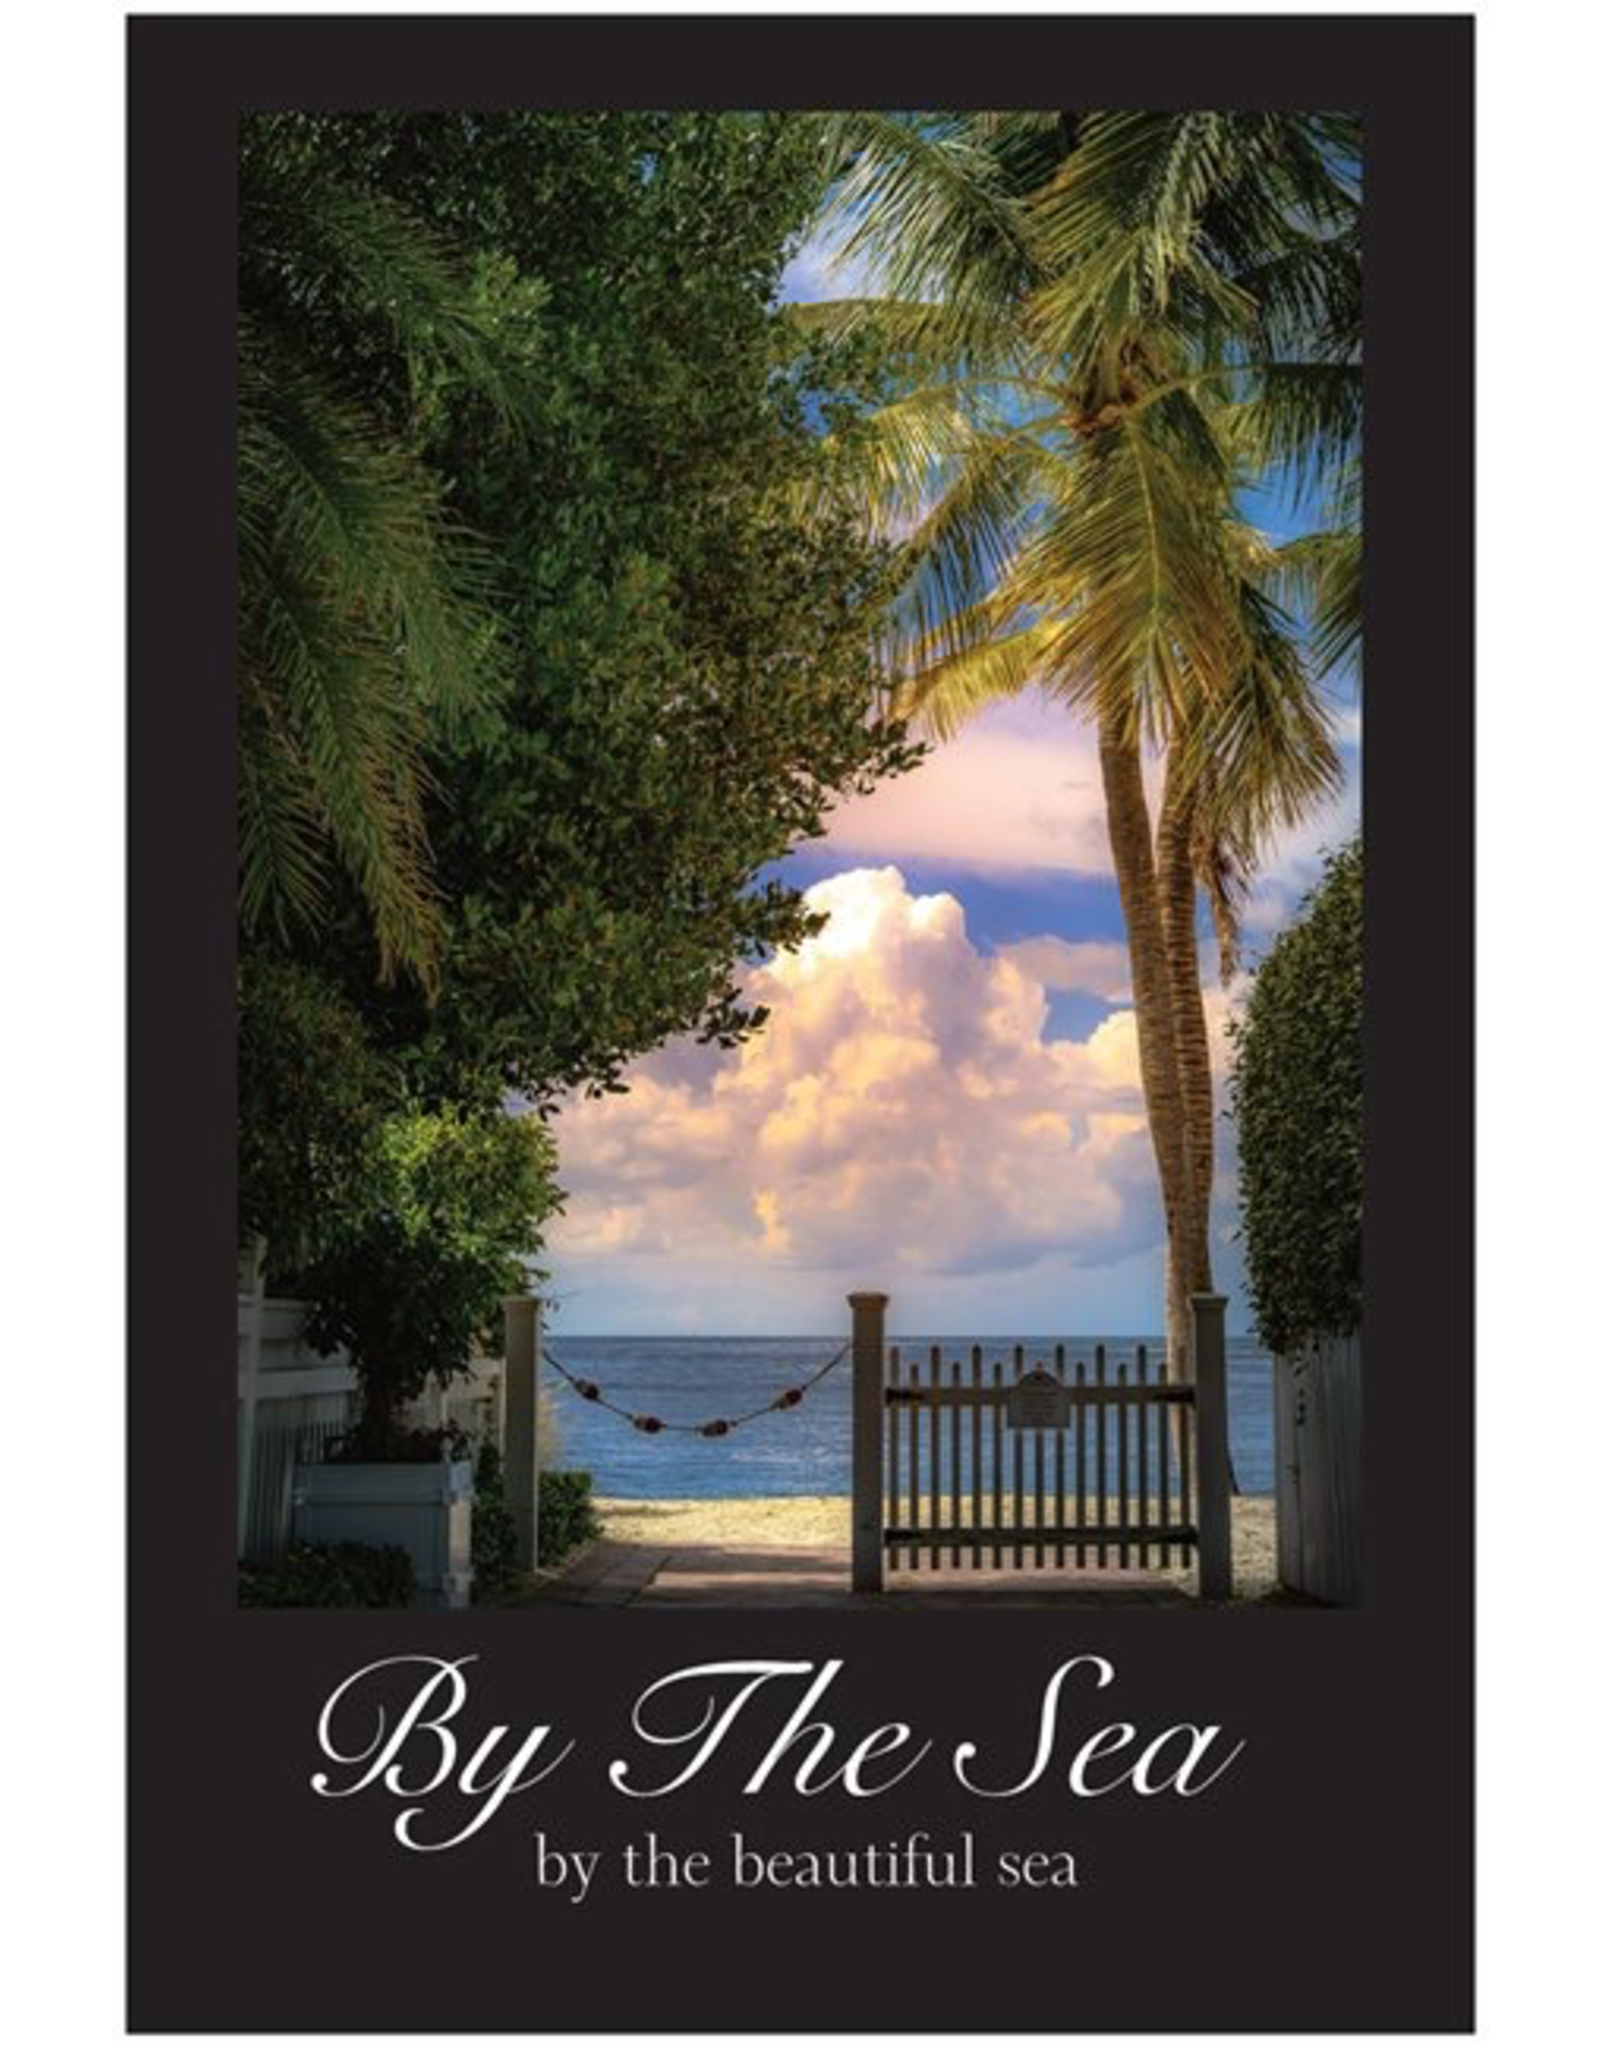 Charles W Gallery Art Poster 24x36 By The Sea By the Beautiful Sea